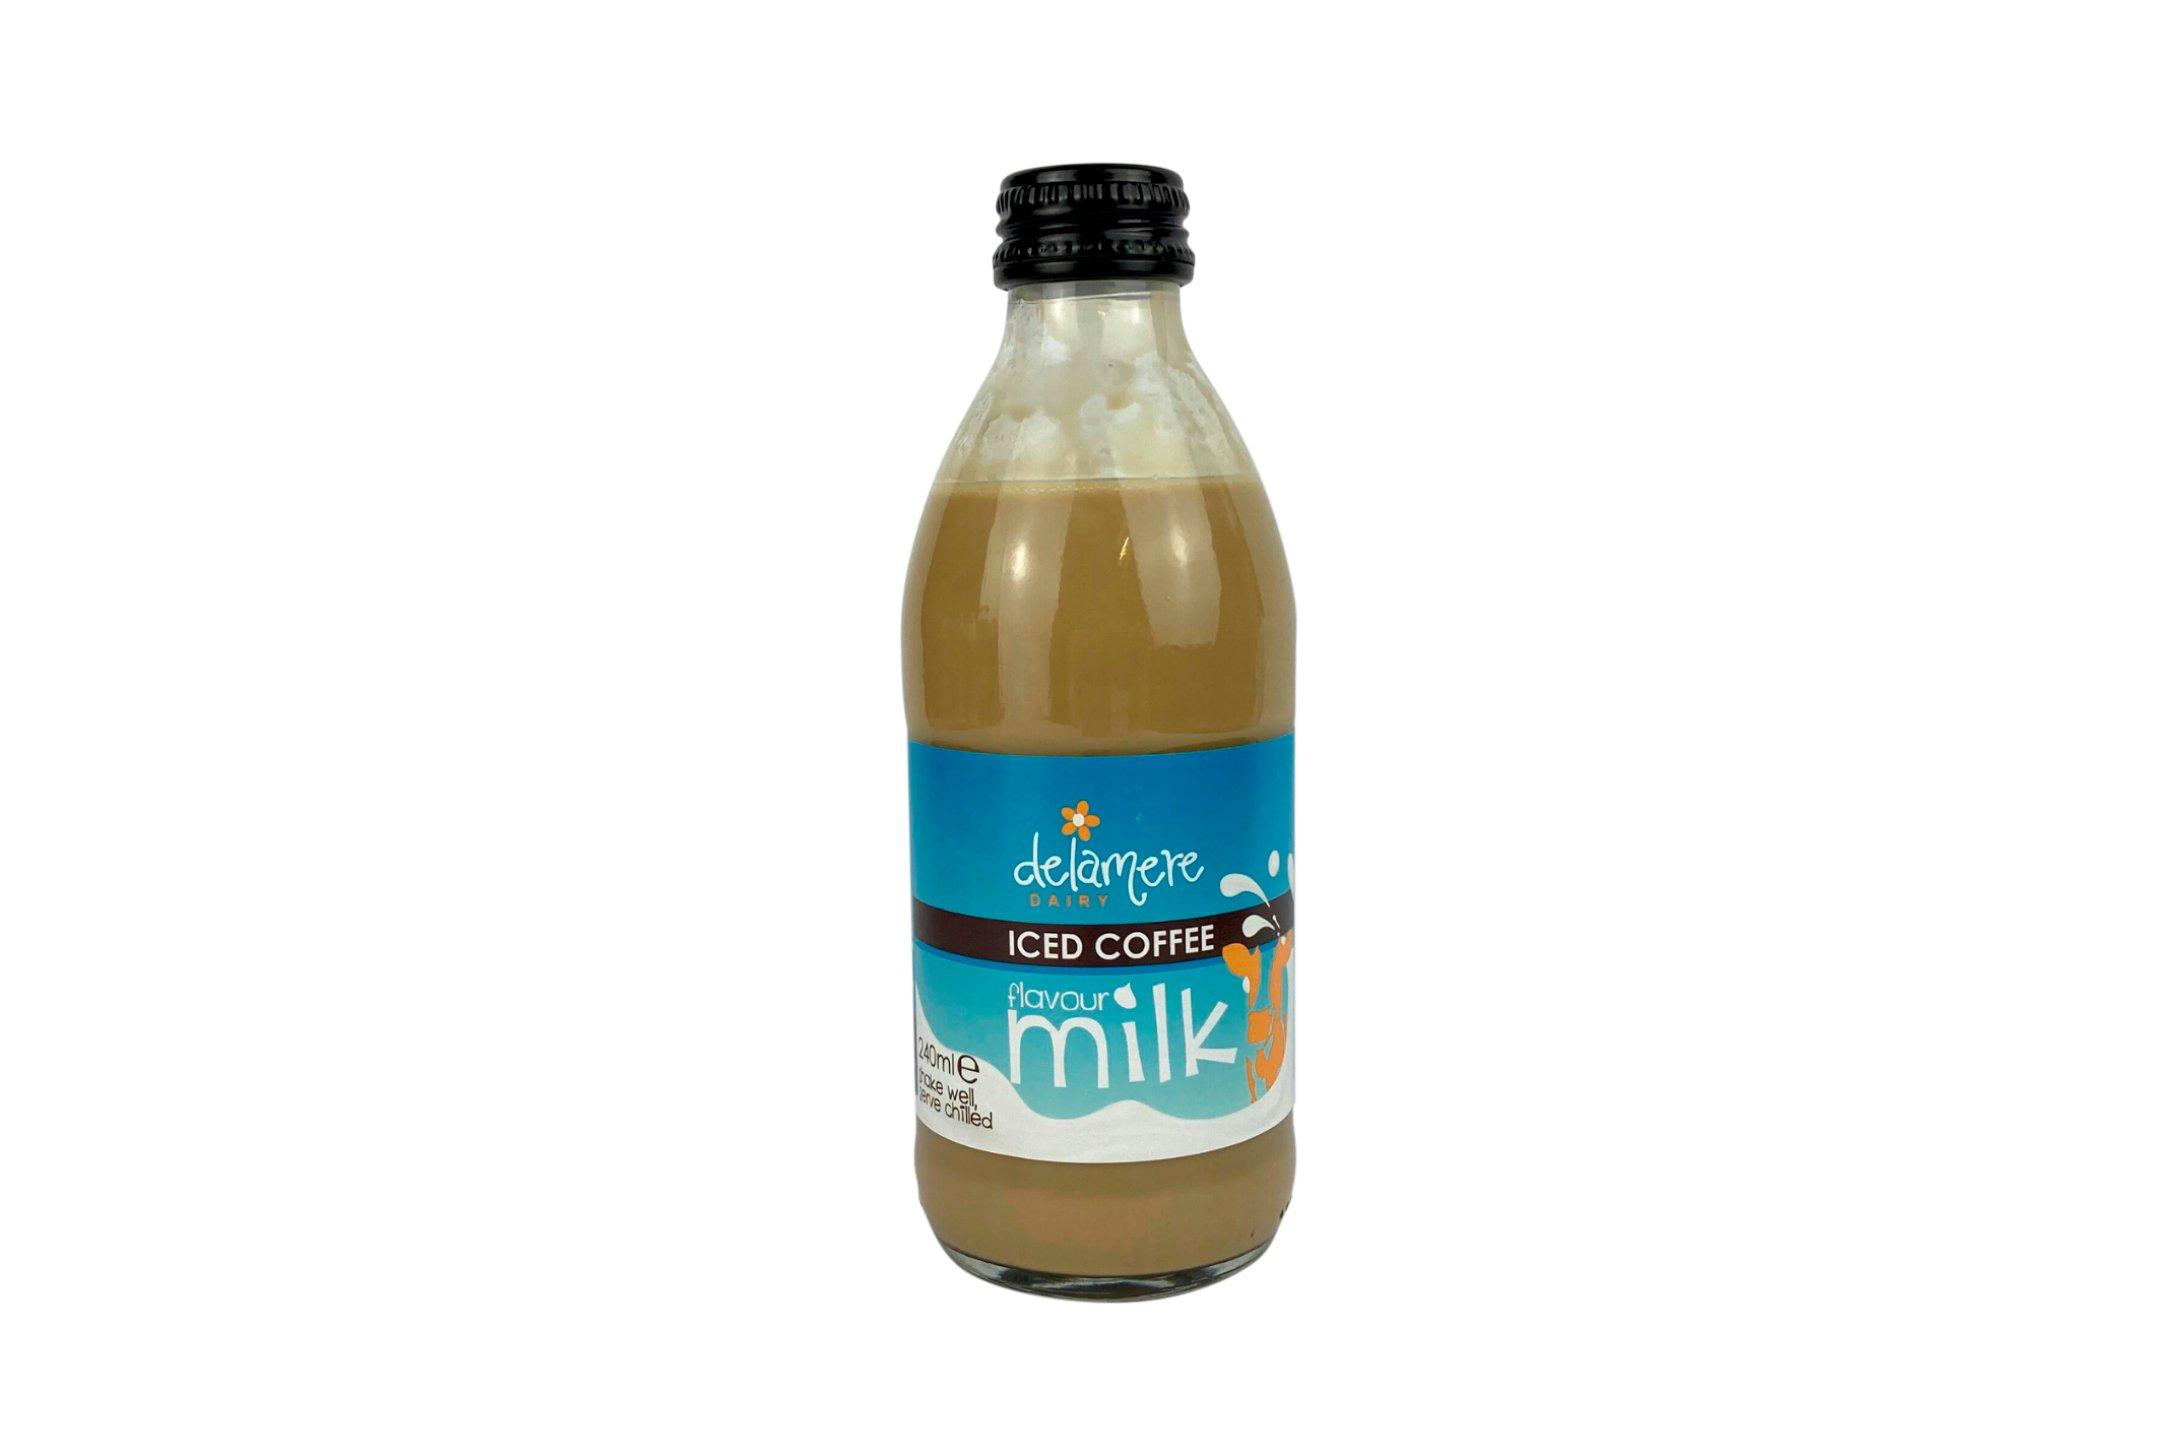 Delamere Dry Iced Coffee Flavoured Milk